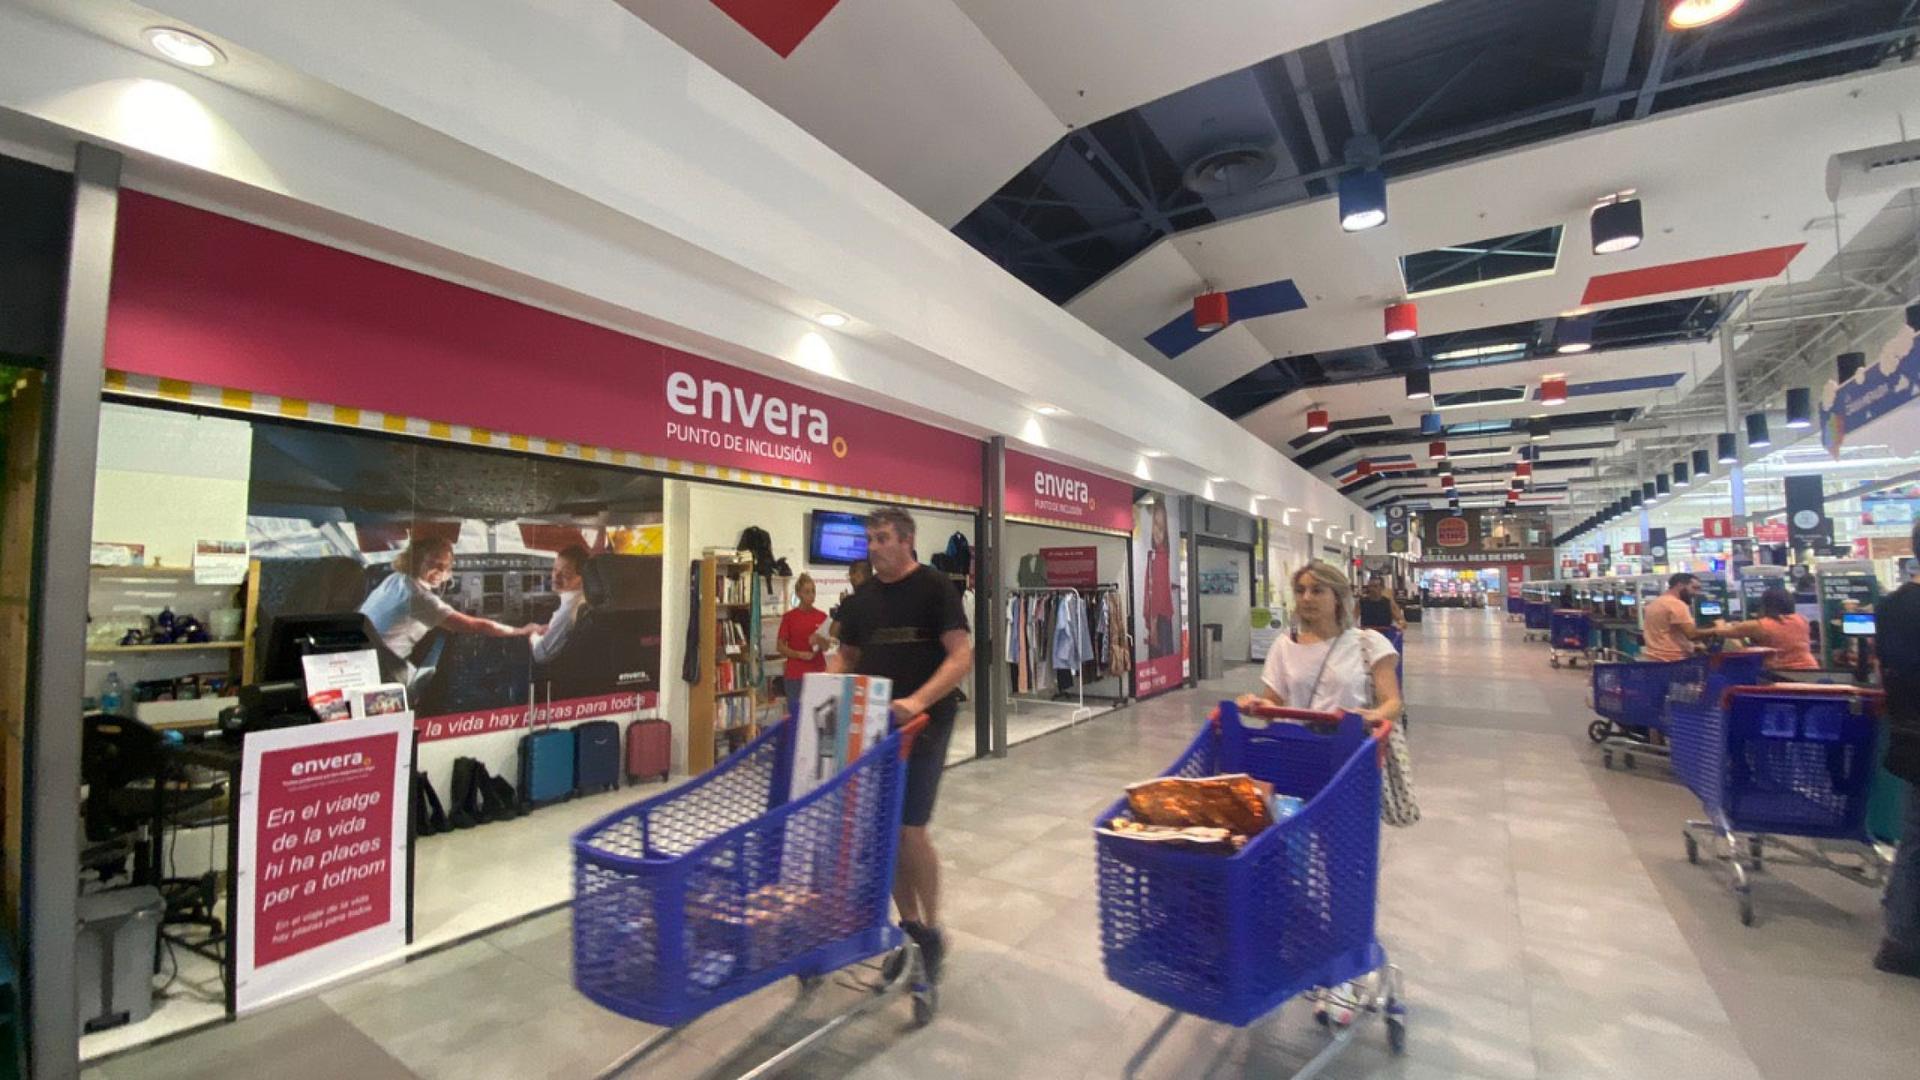 Envera is located within a supermarket, making it very easy for customers to stop in on a regular basis to find something special. 